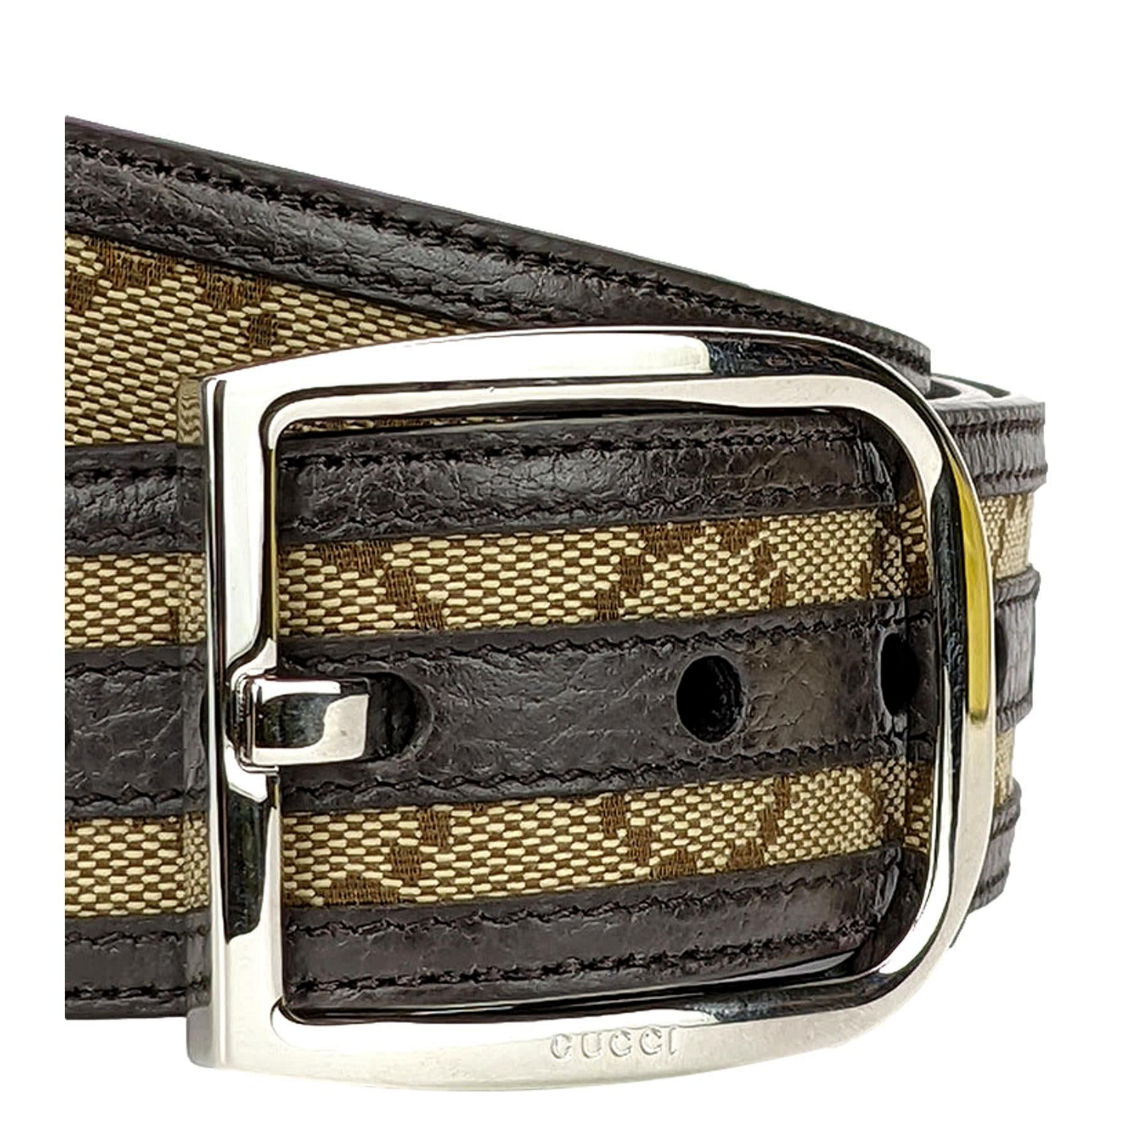 Gucci Mens GG Brown and Beige Size 36/90 Canvas Leather Trim Belt (New) - Image 4 of 5